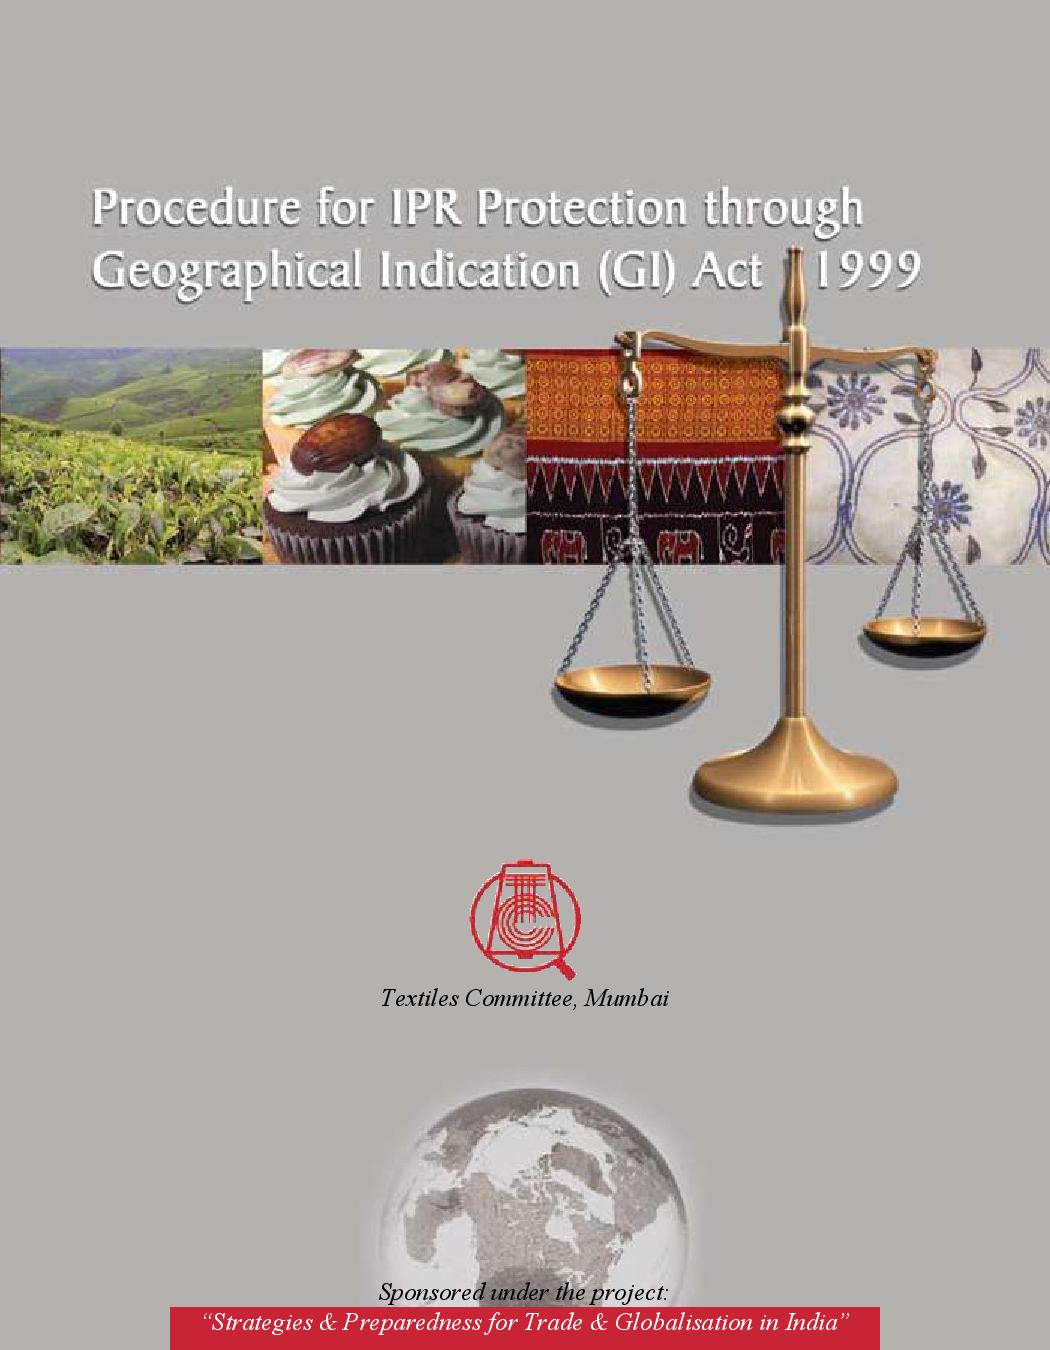  Procedure for IPR protection through GI Act